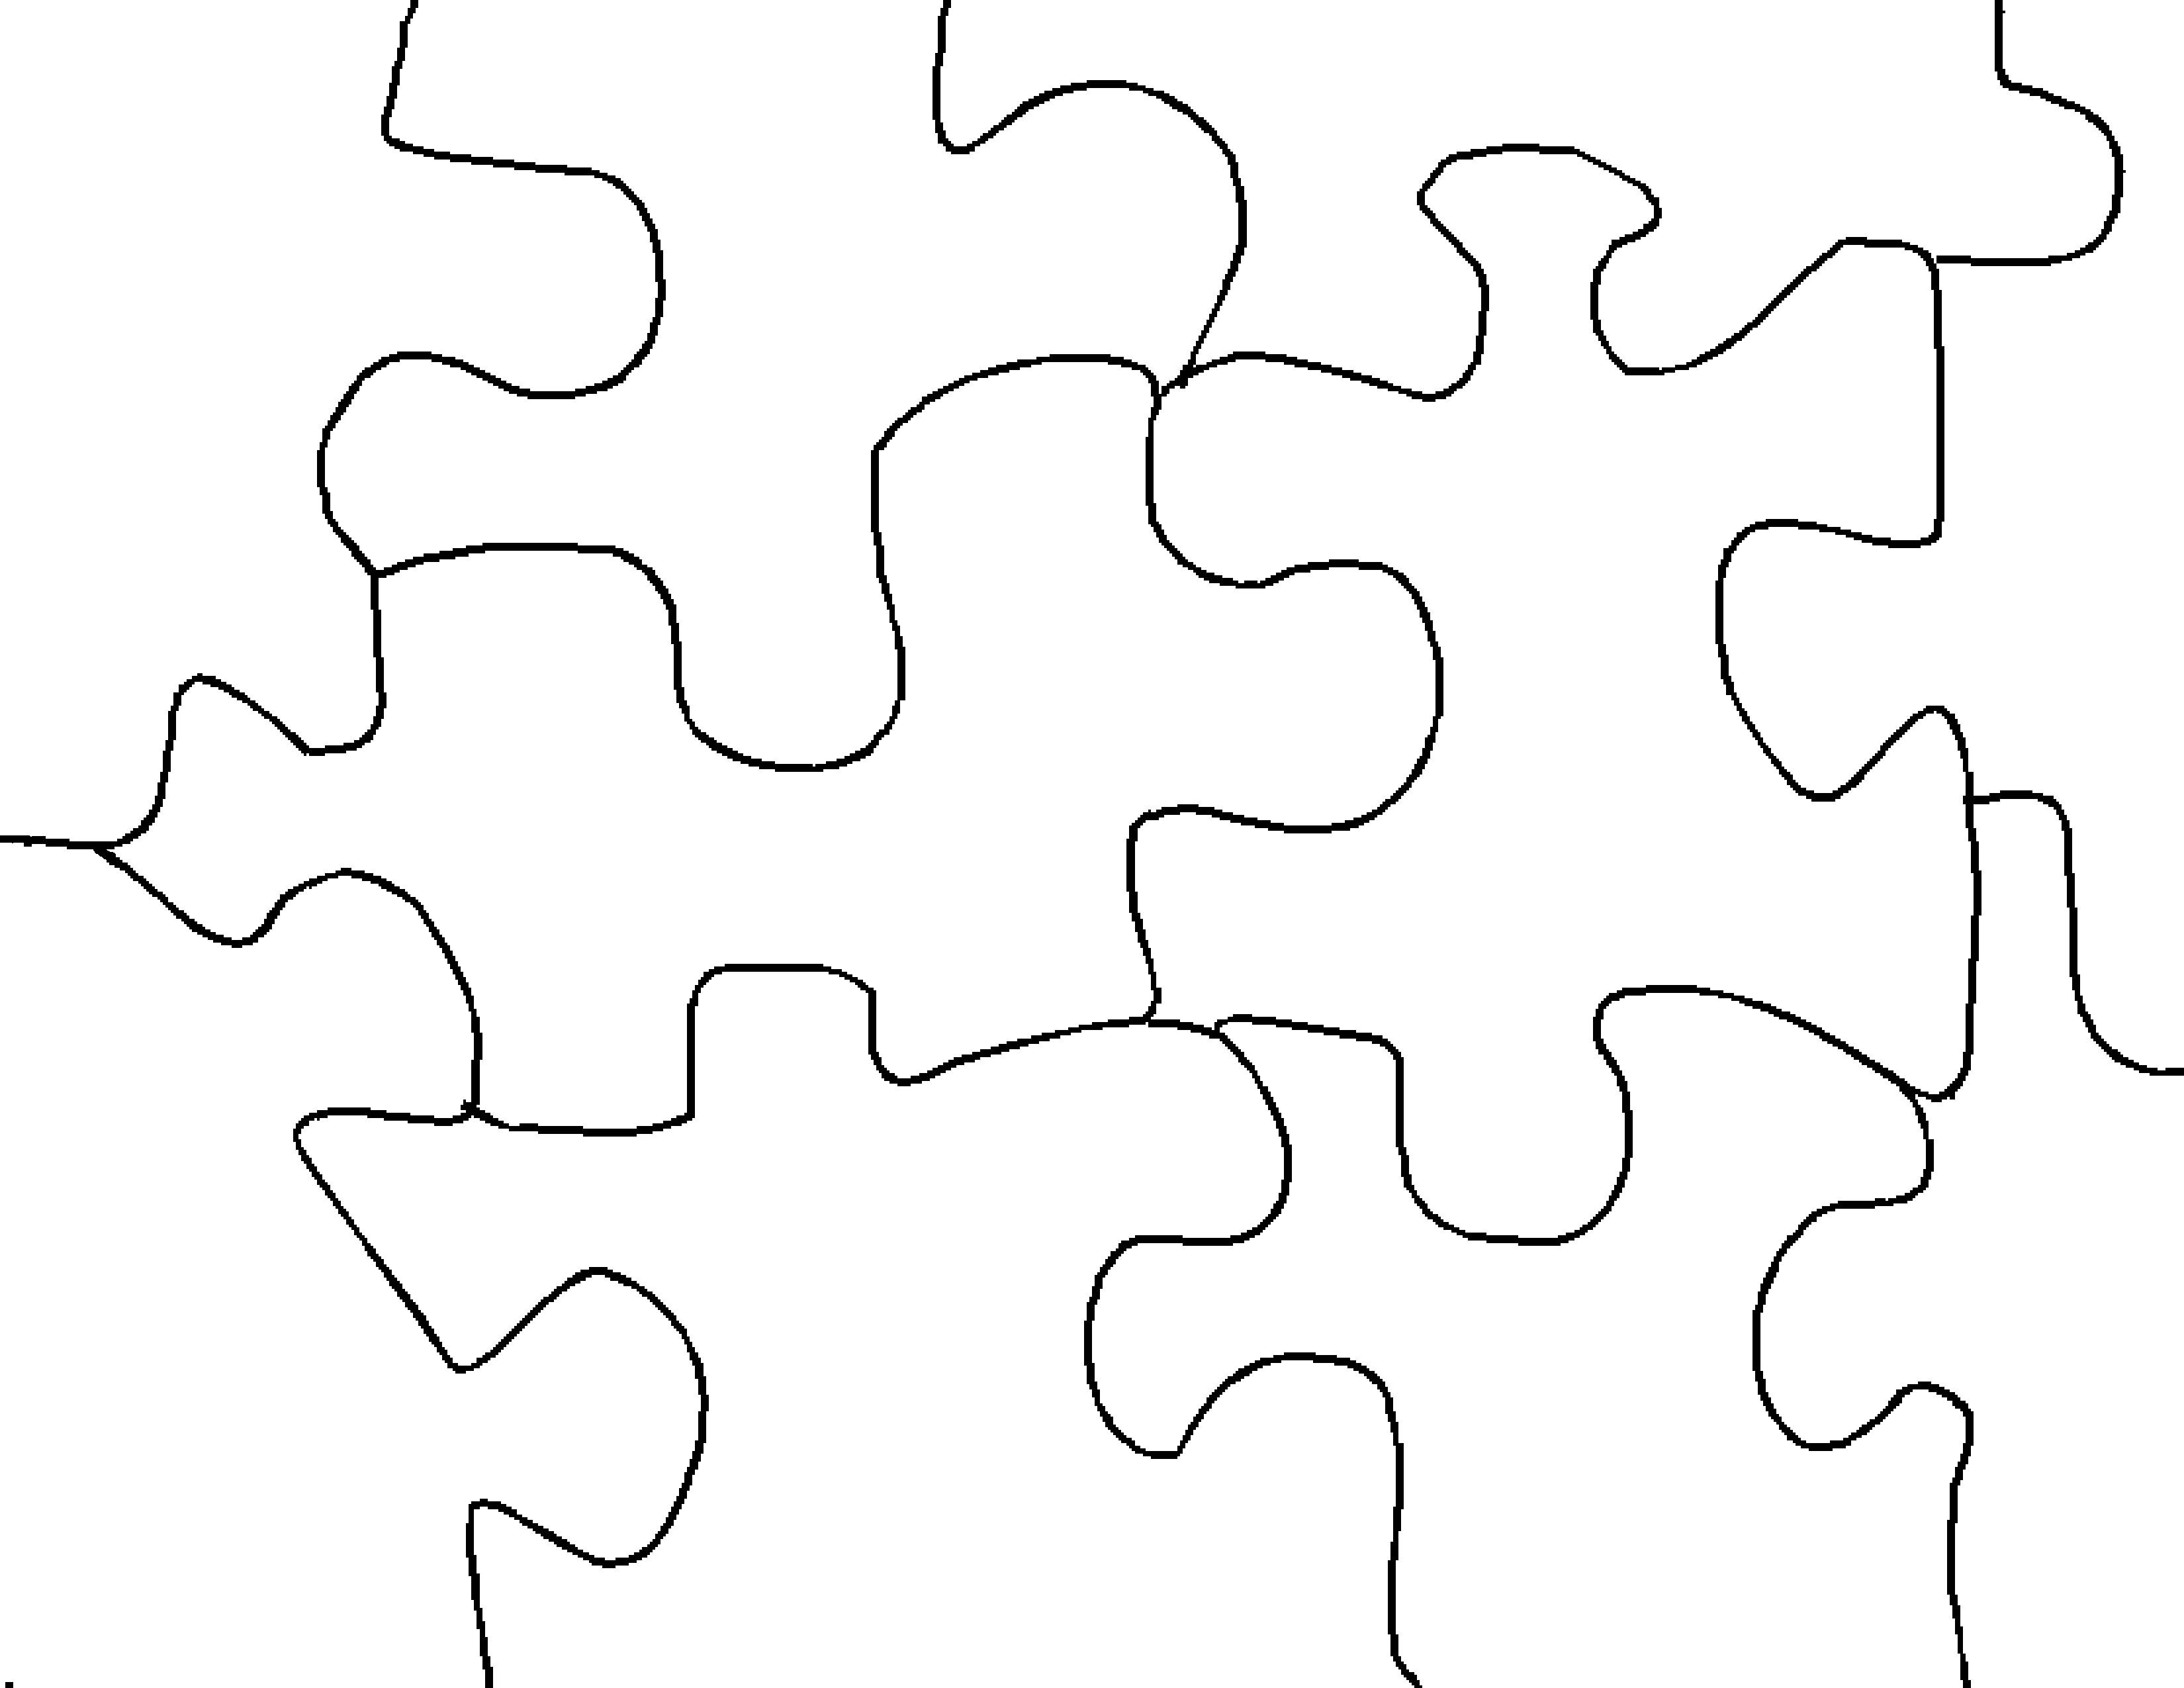 Make Jigsaw Puzzle - Printable 2 Piece Puzzles